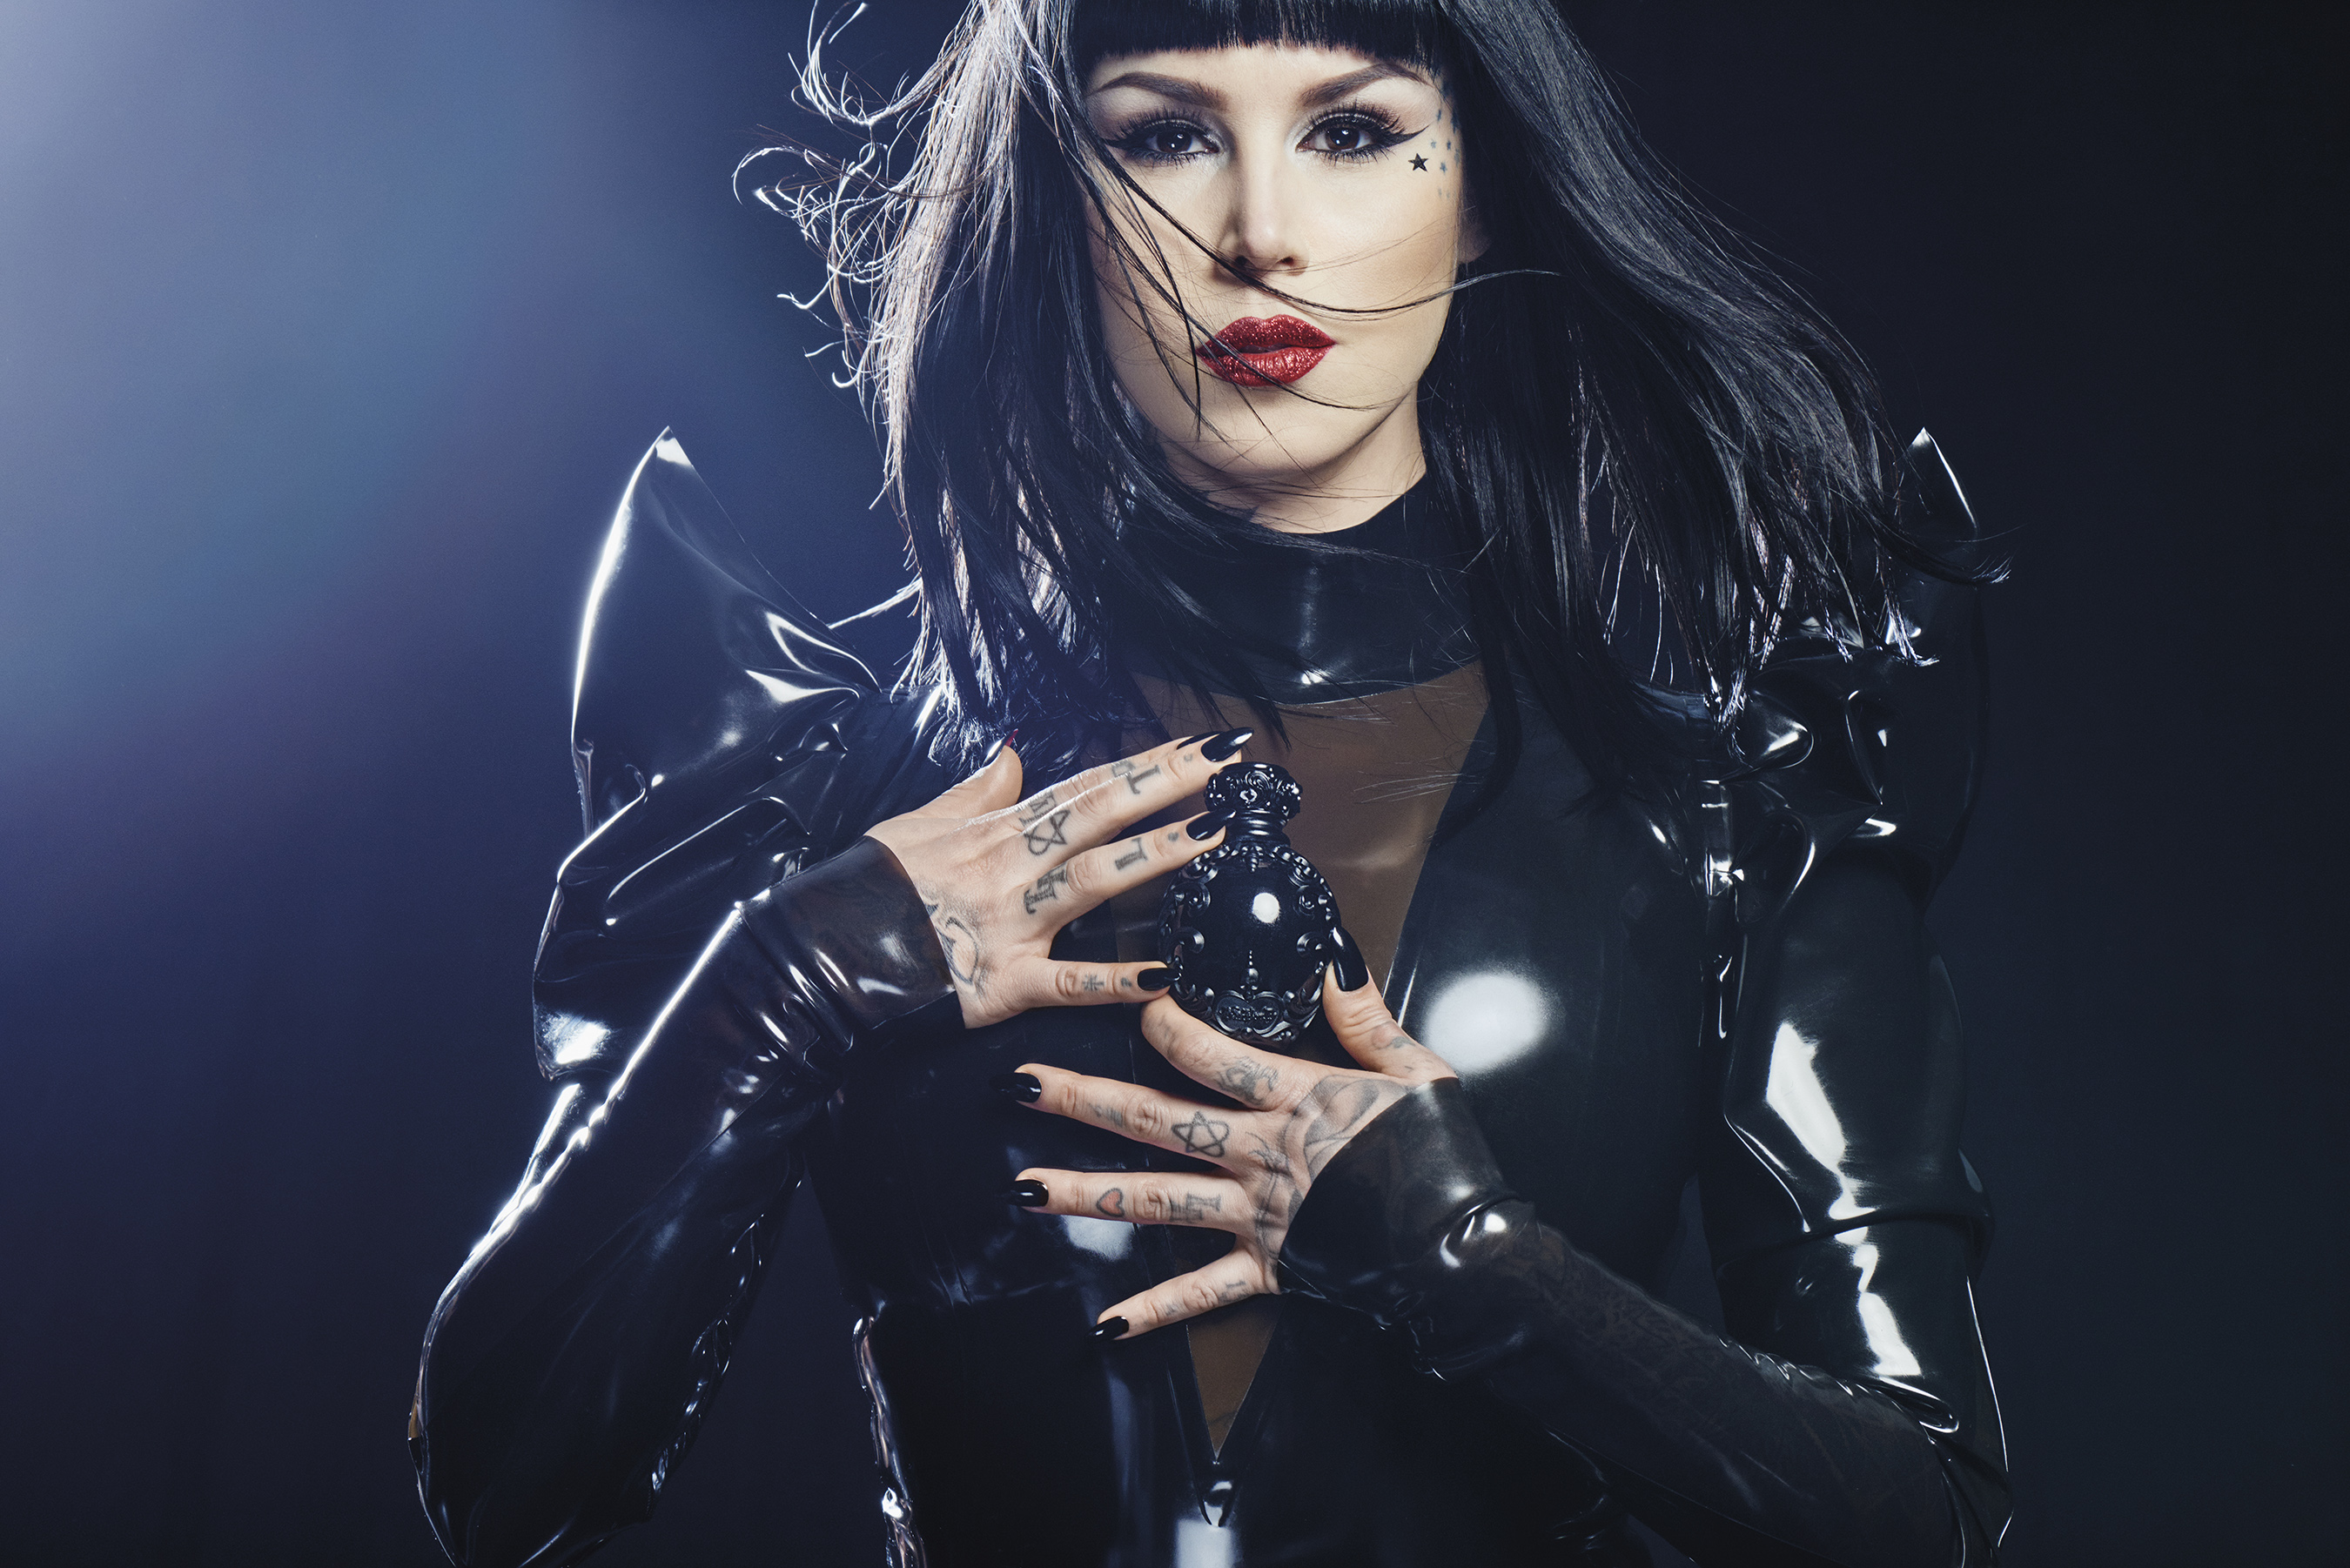 Kat Von D shown in the Sinner fragrance campaign. Photo By: Mariano Vivanco.